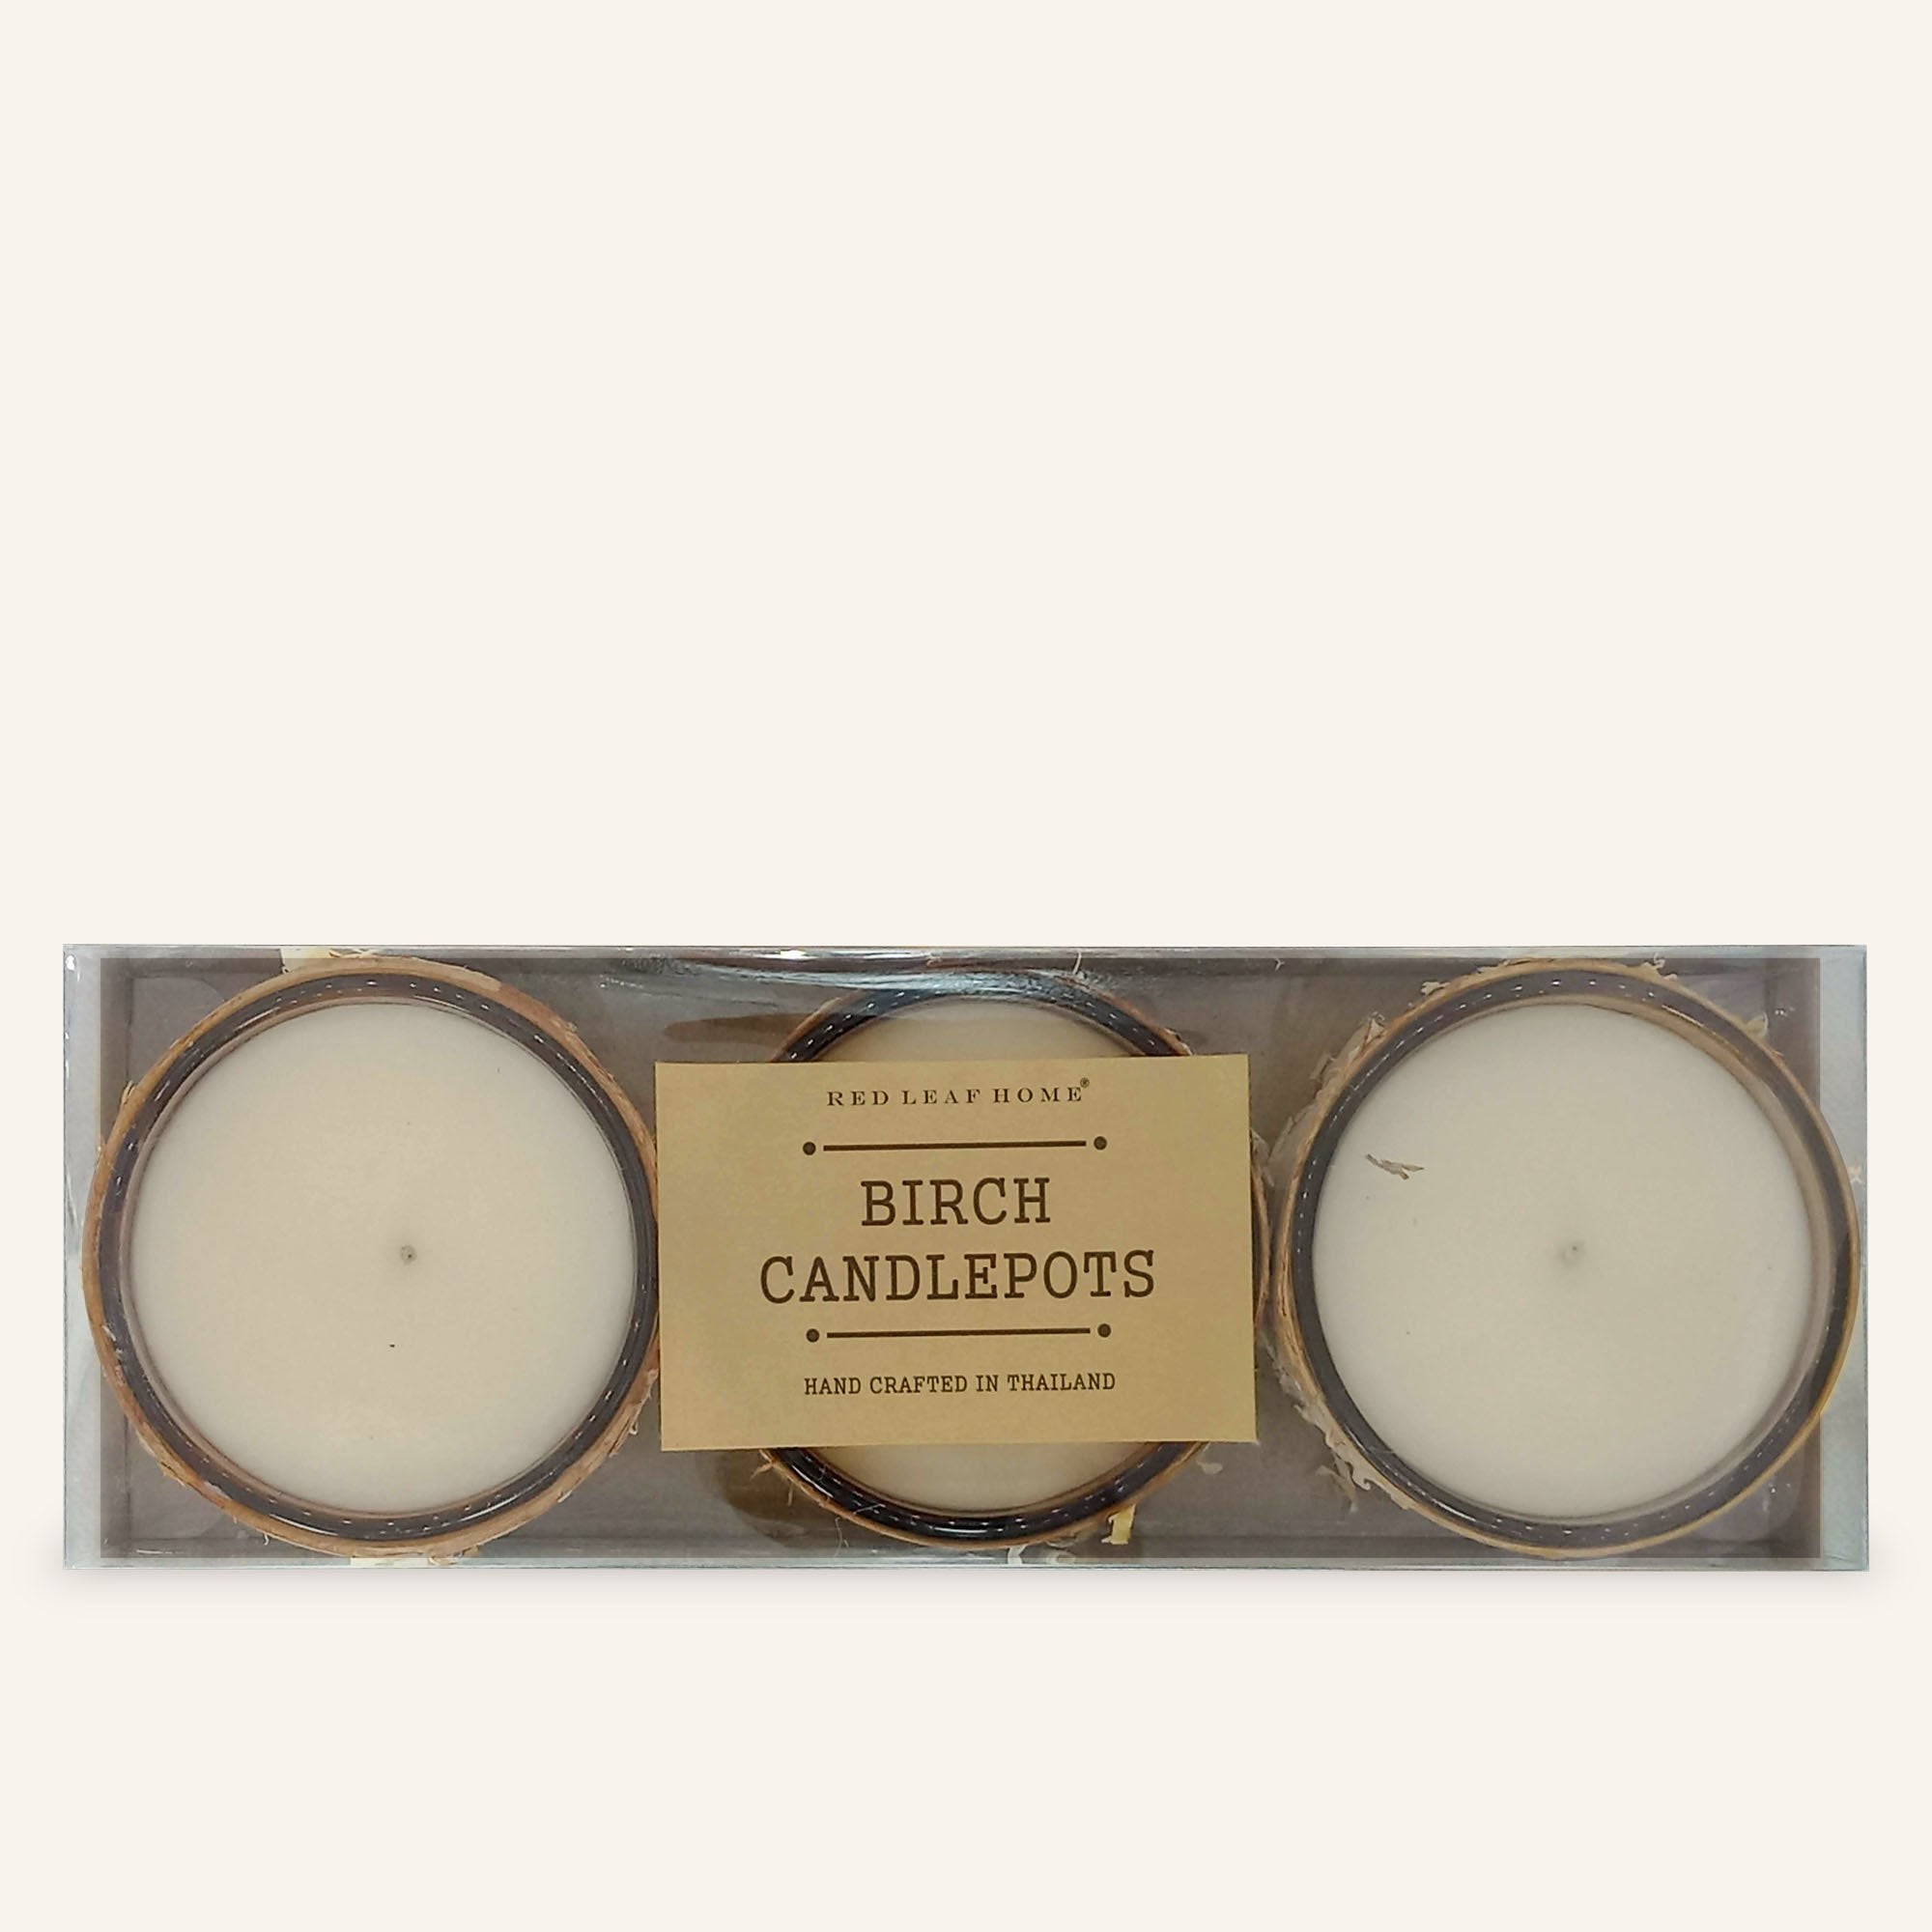 A pack of 3 birch filled candles from over head. There is a brown label that reads, "Red Leaf Home. Birch Candlepots. Handcrafted in Thailand."